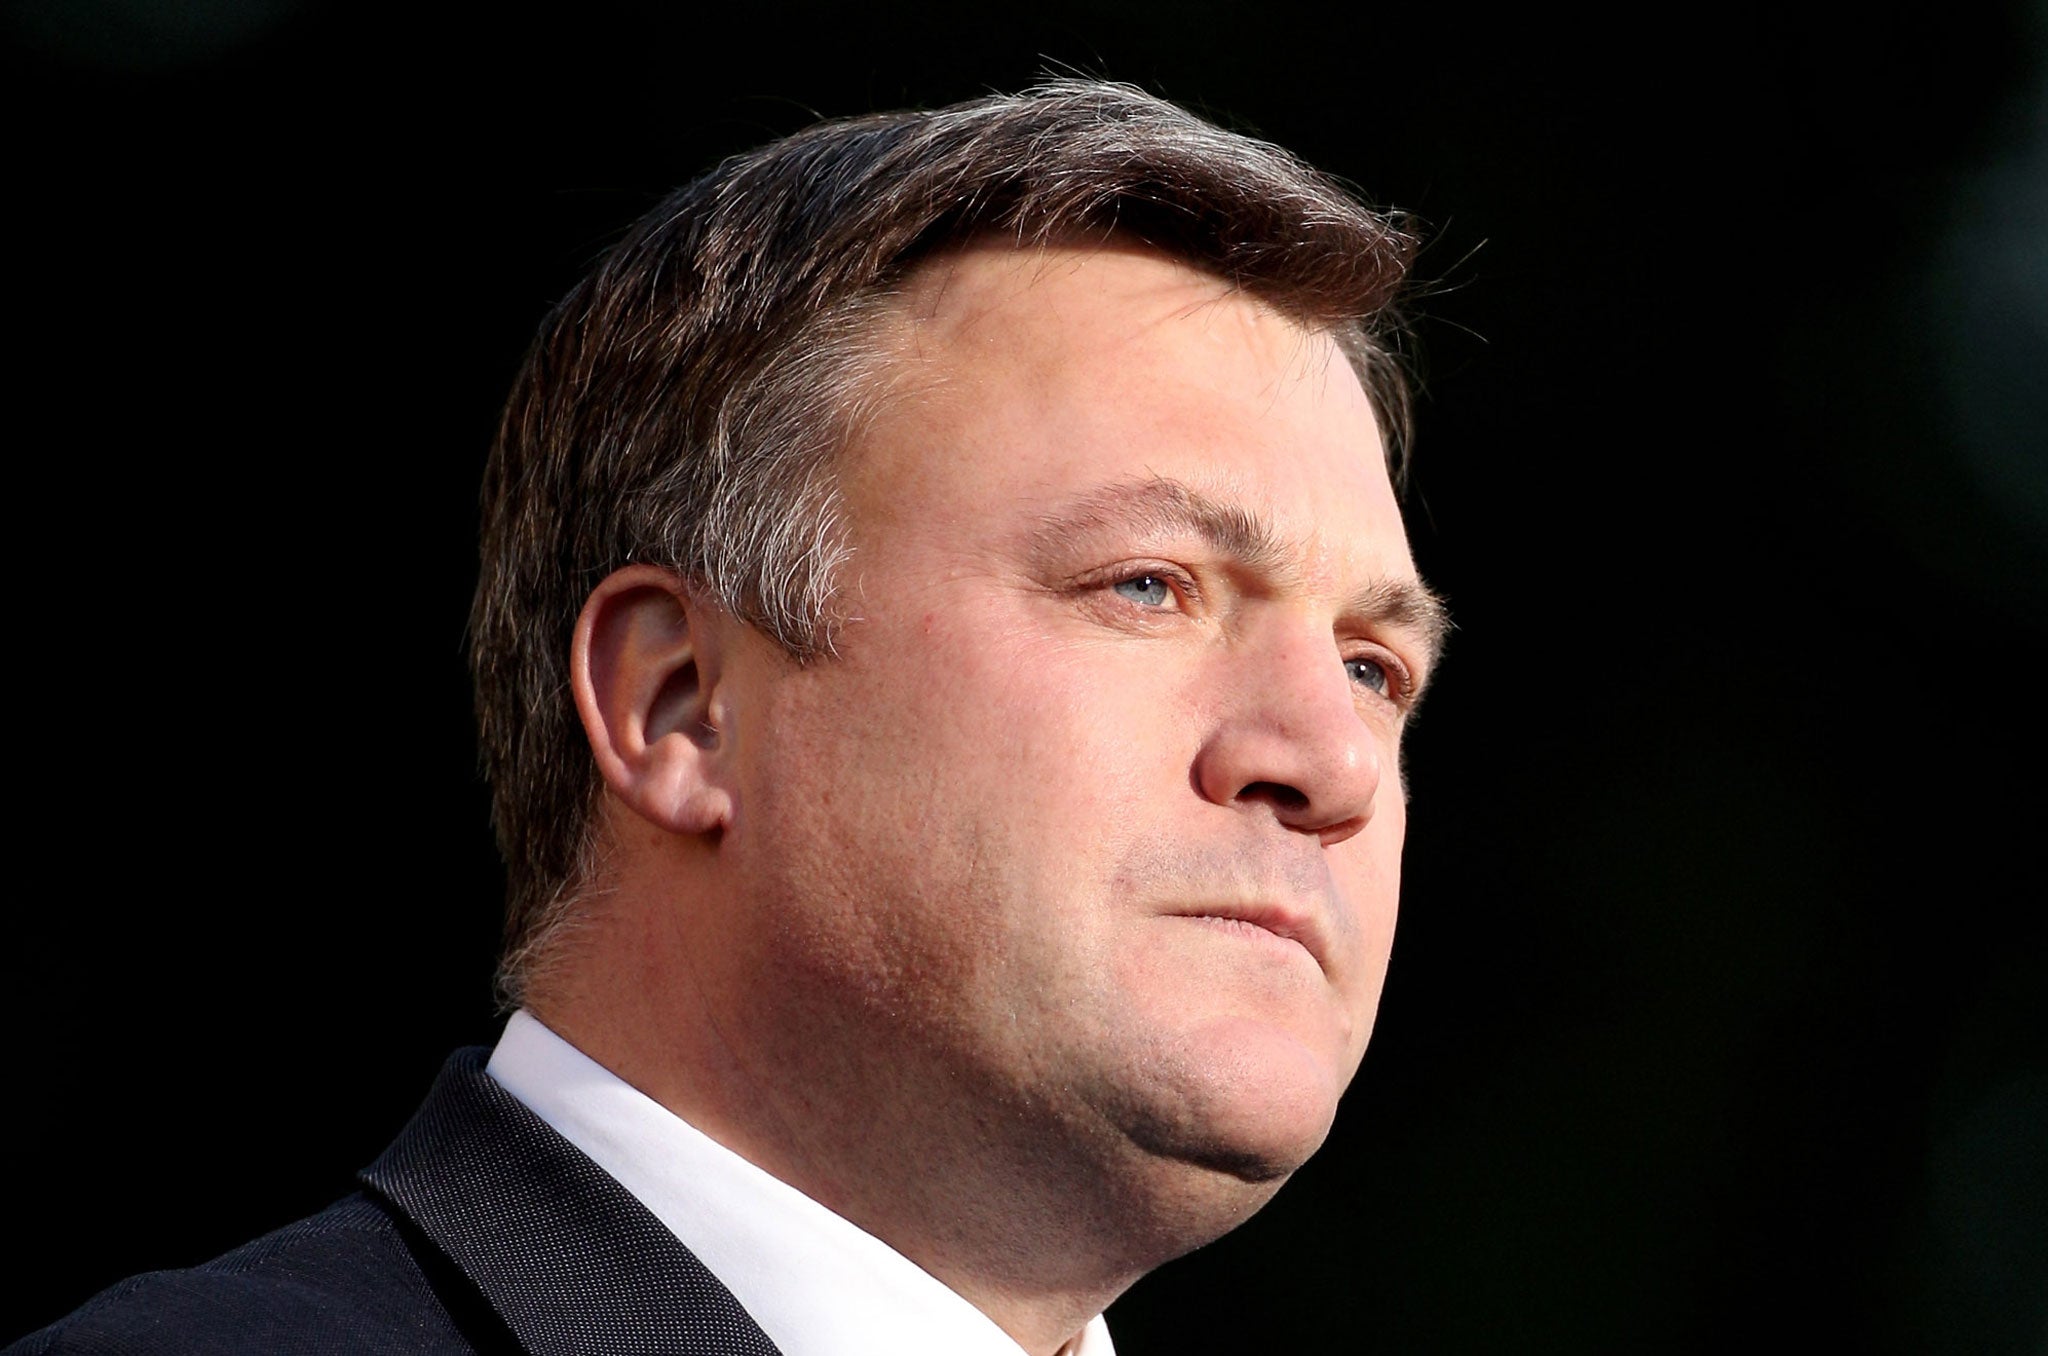 Labour's Shadow Home Secretary Ed Balls near Parliament on October 20, 2010 in London, England.